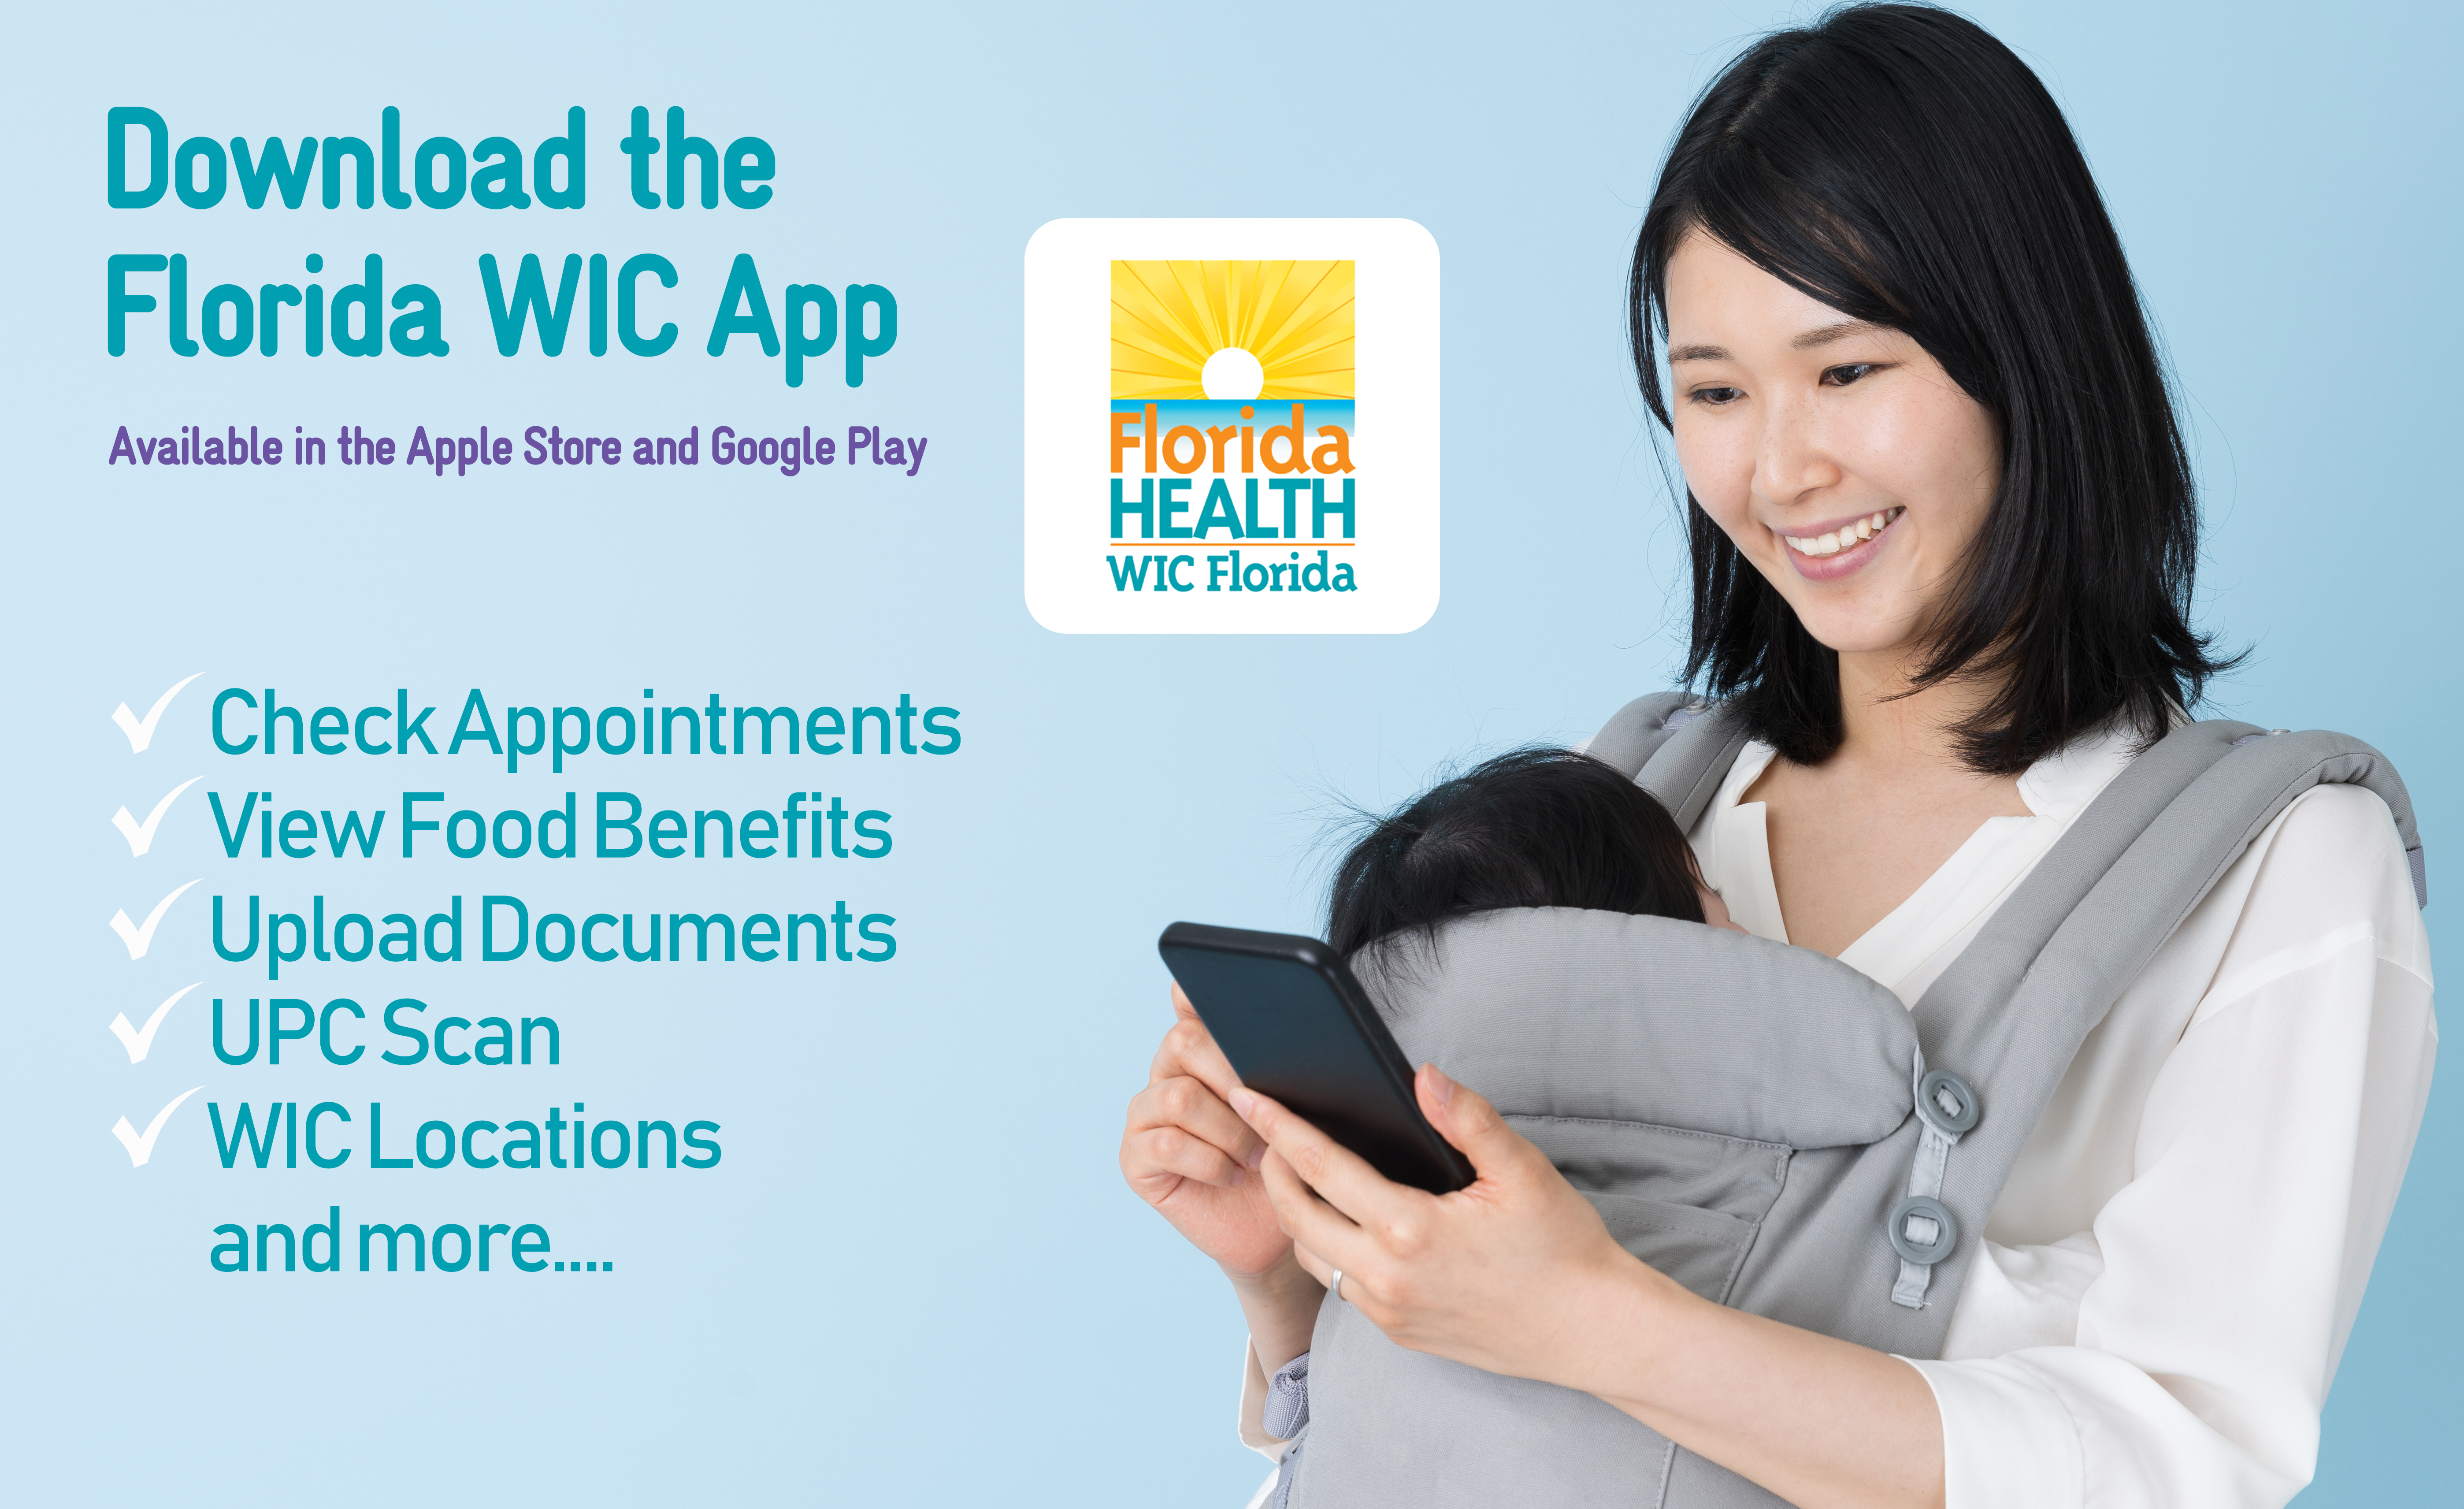 Download the Florida WIC app. Available in the Apple and Google Play store. Check Appointments, view benefits, upload documents, upc scan, wic locations, and more